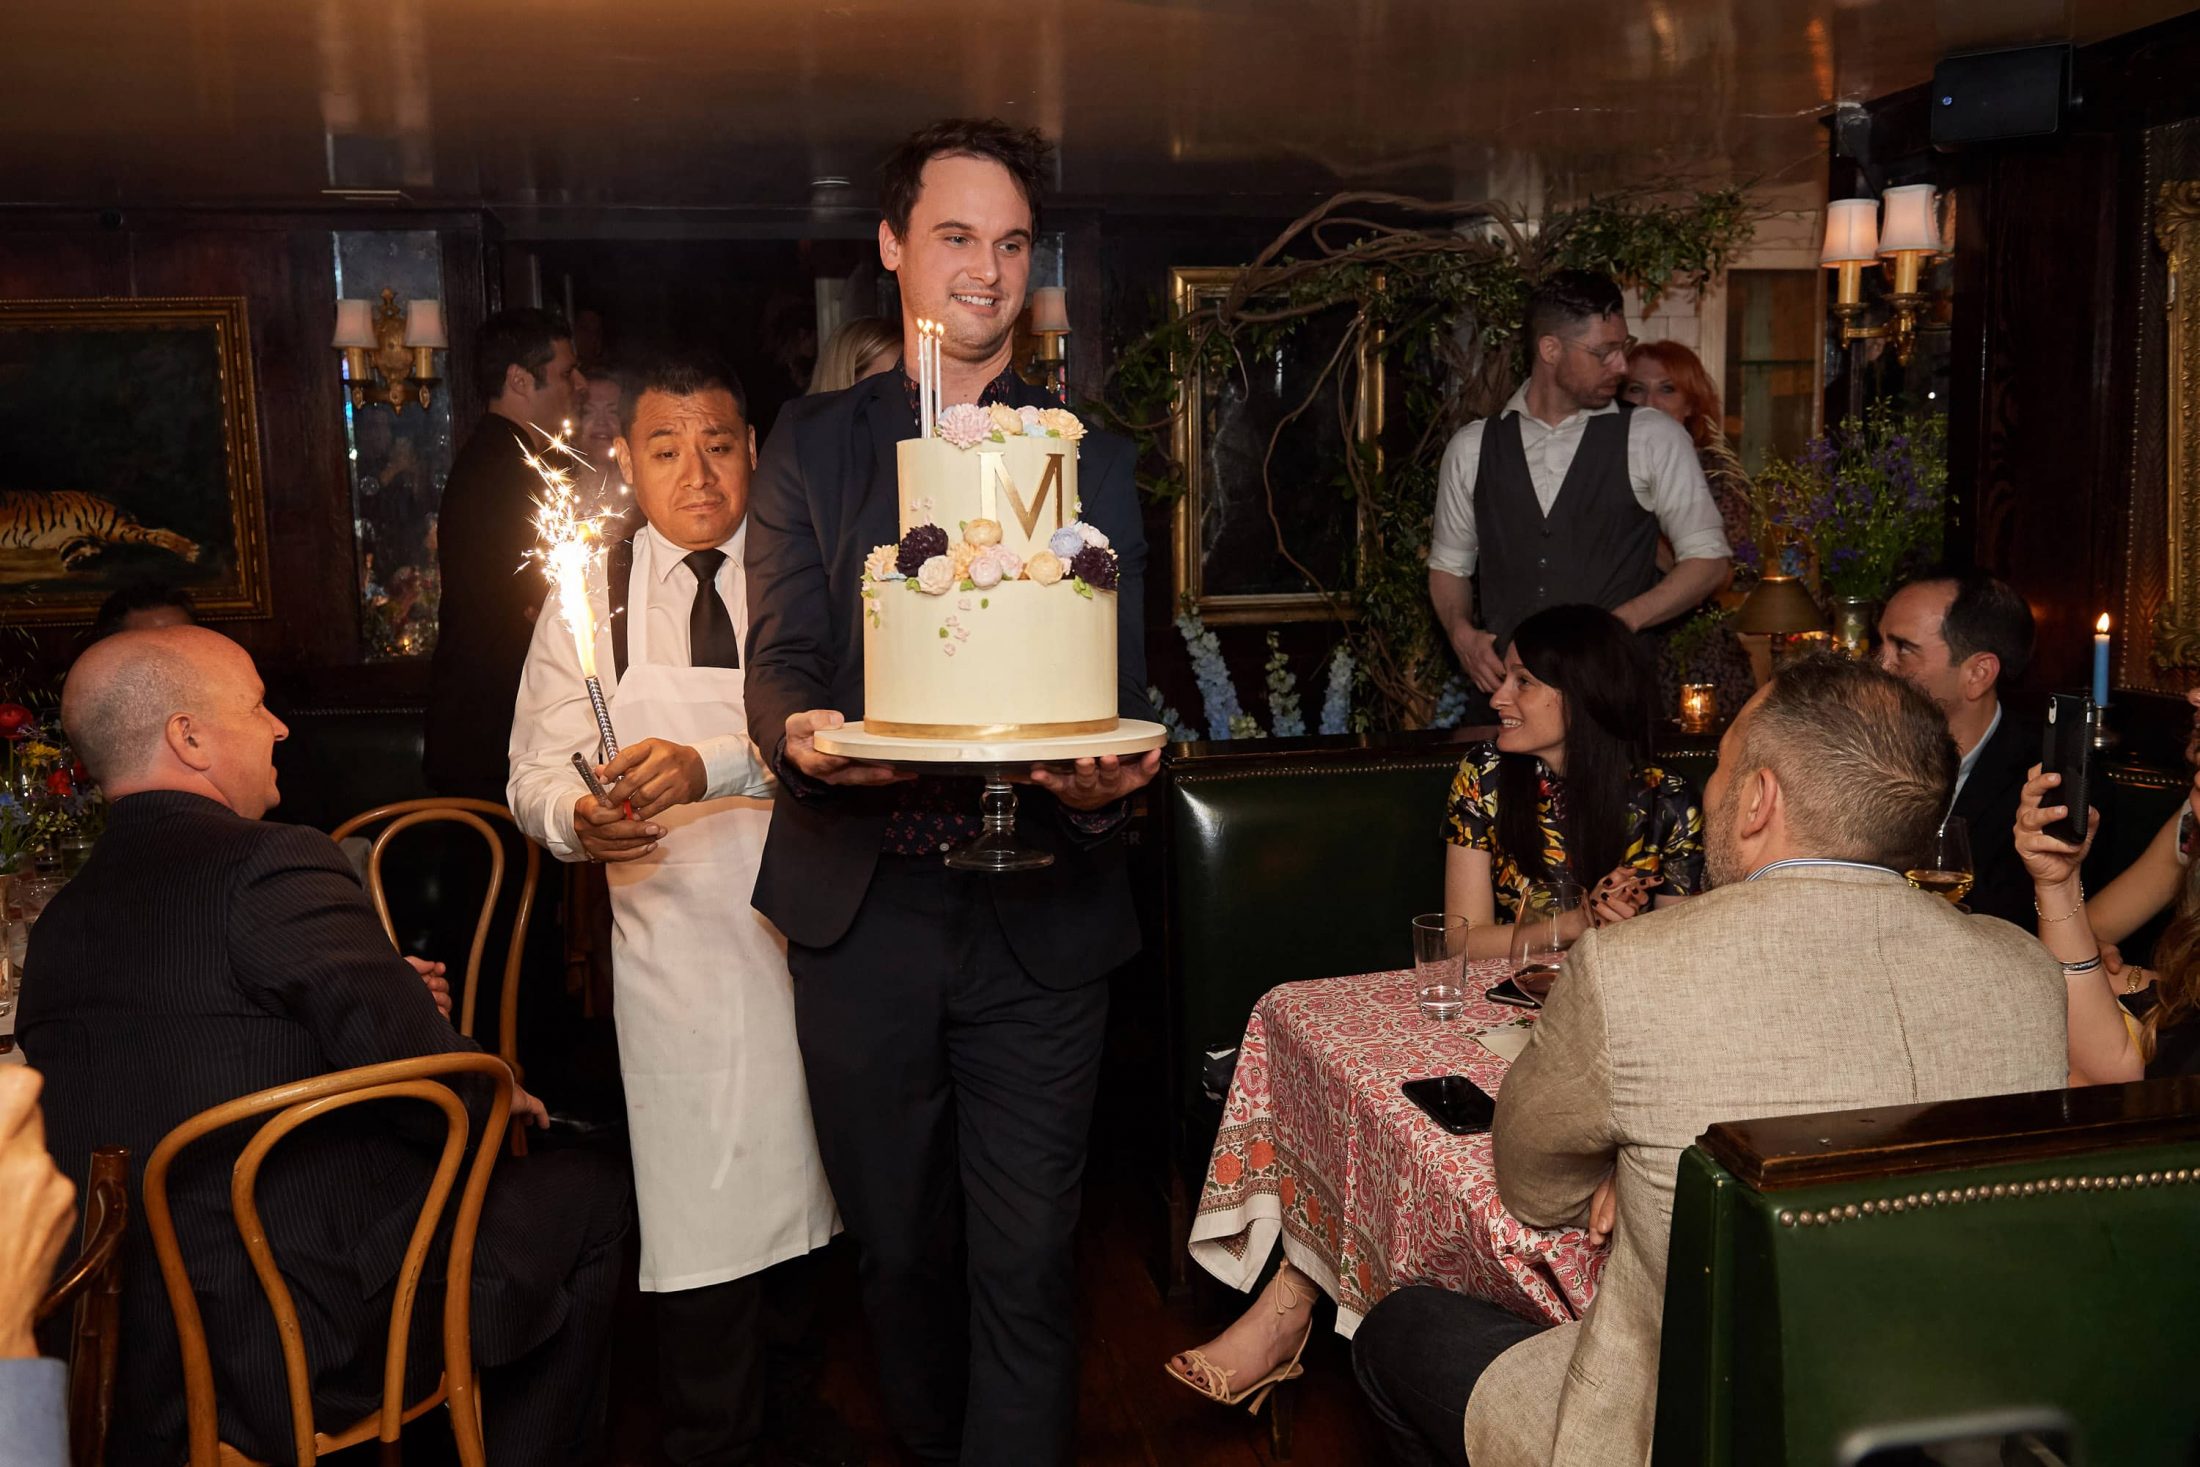 Cake at this 40th surprise birthday party at Beatrice Inn in West Village | Photo by Darren Ornitz